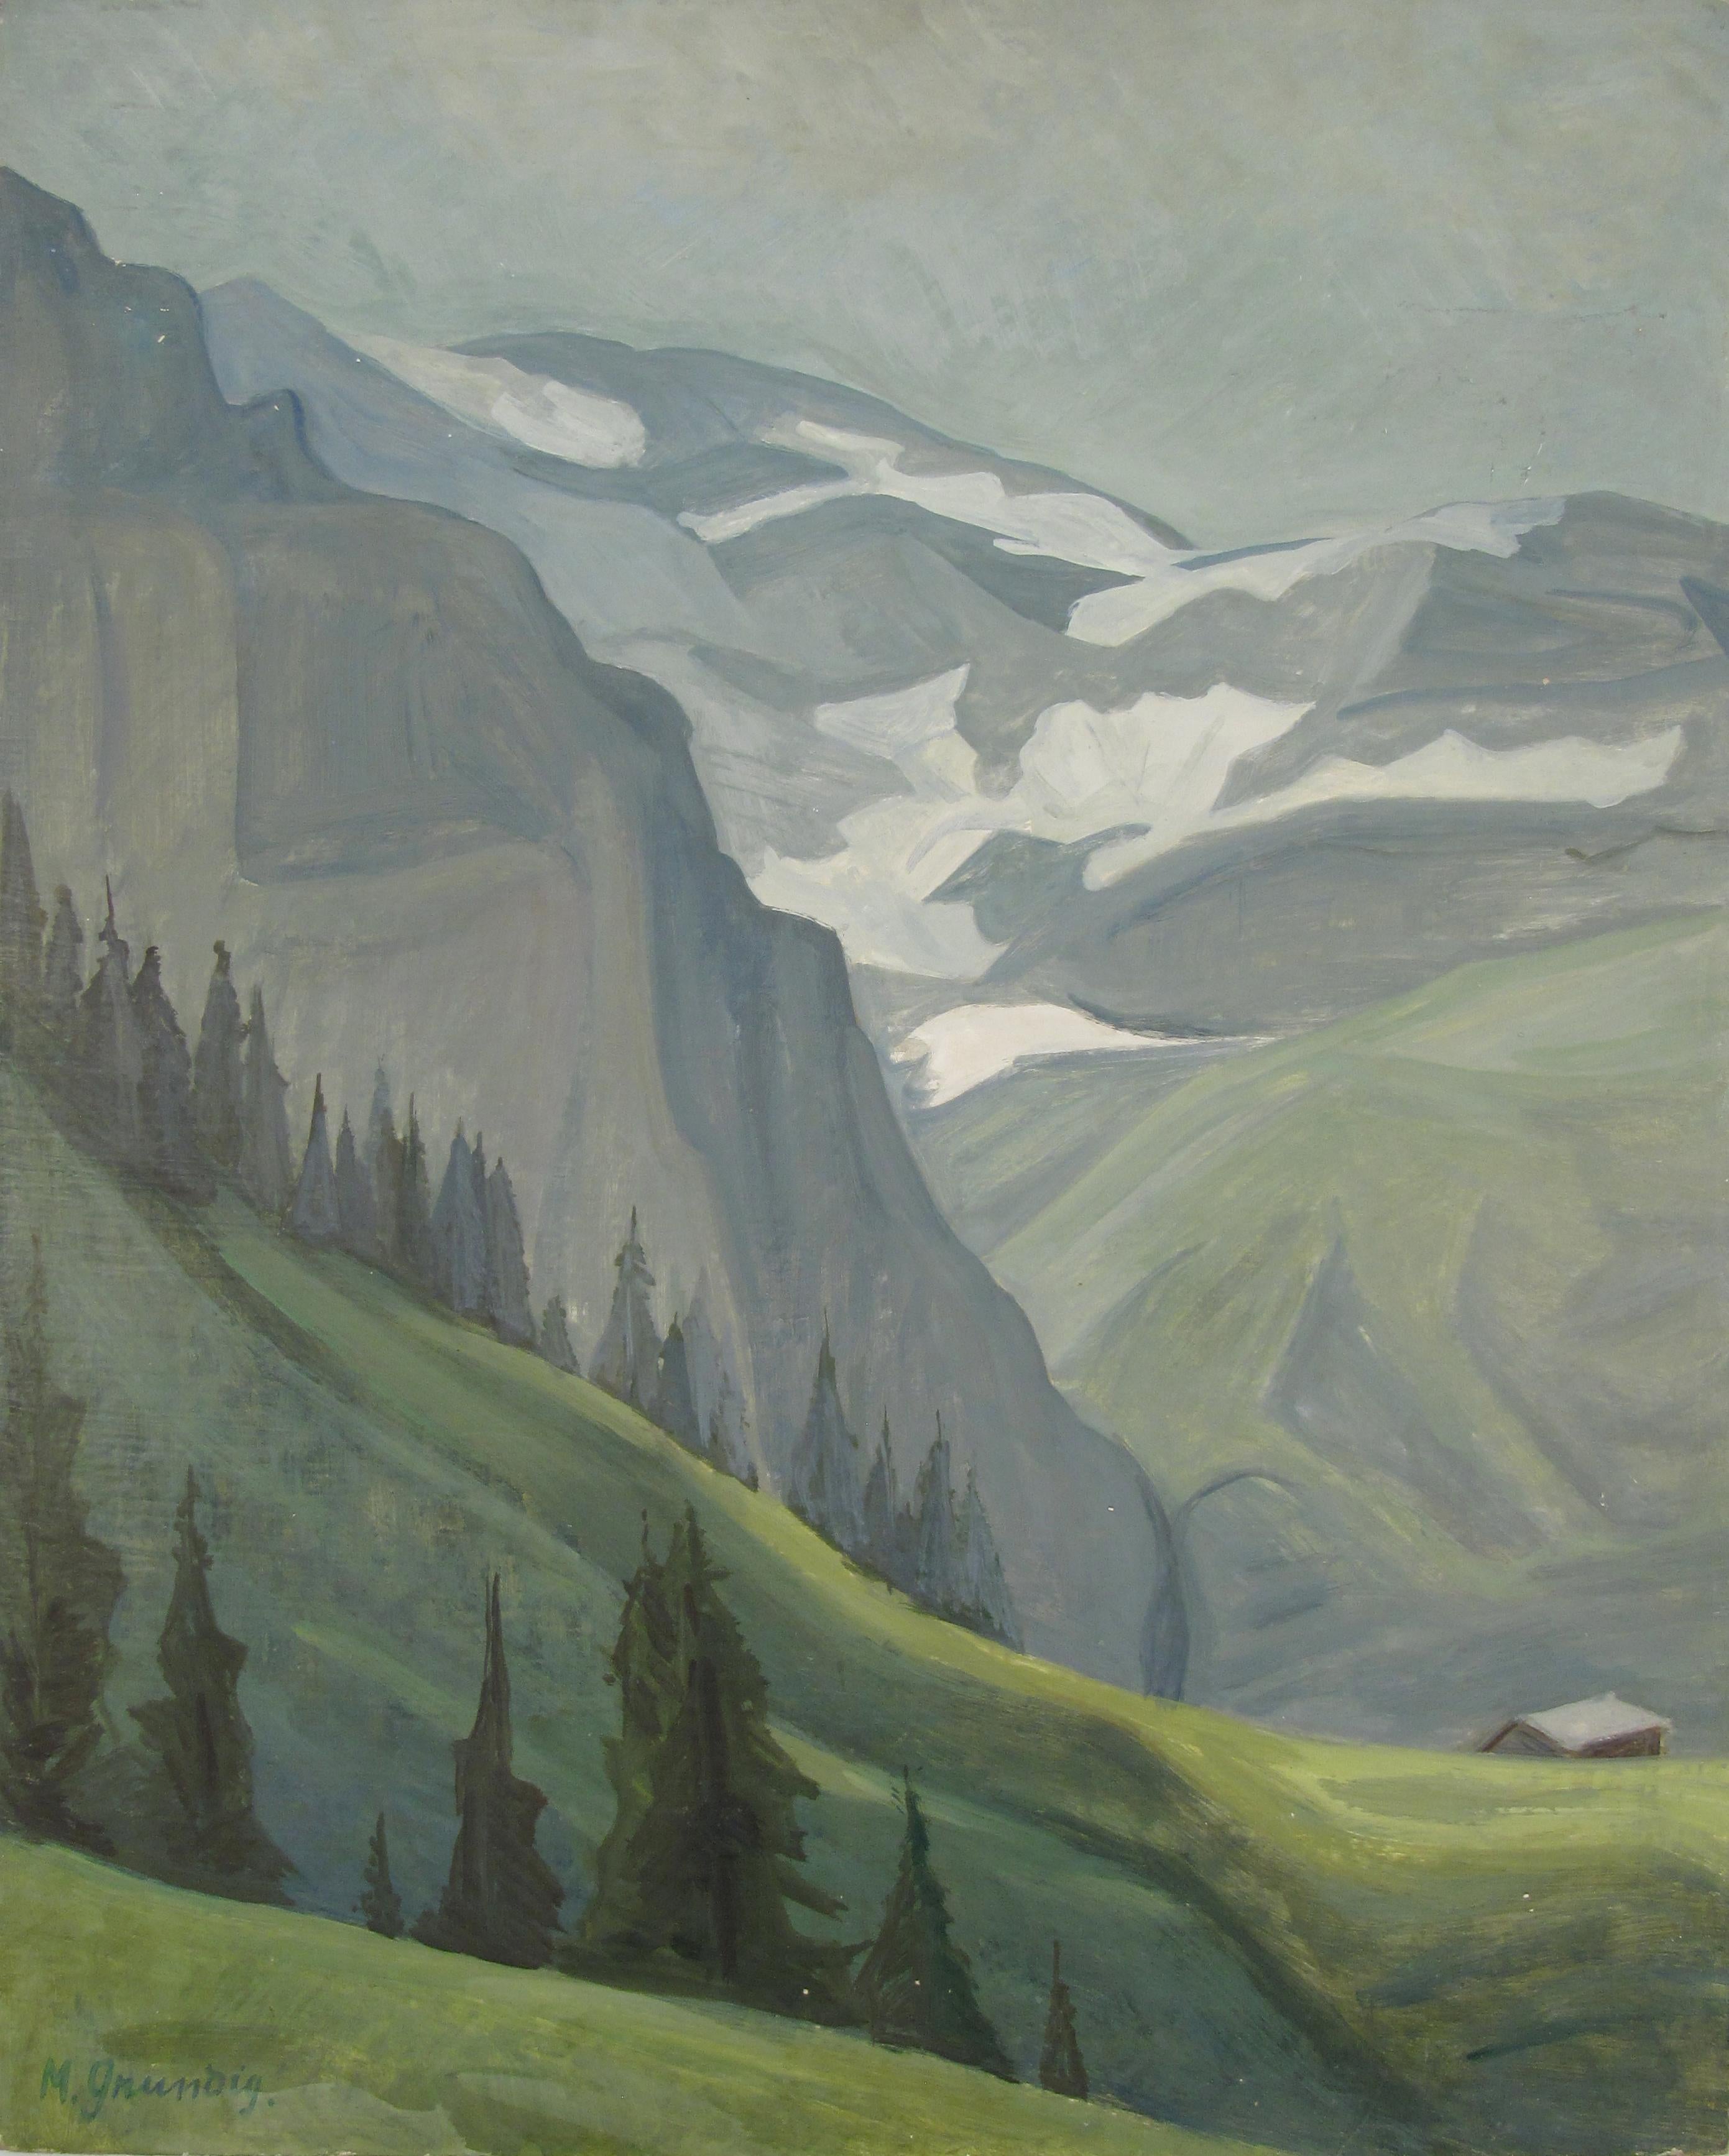 Marcella Grundig Figurative Painting - Mountains in the Valais / Wallis , Switzerland - Exhibited Oil Painting in 1950